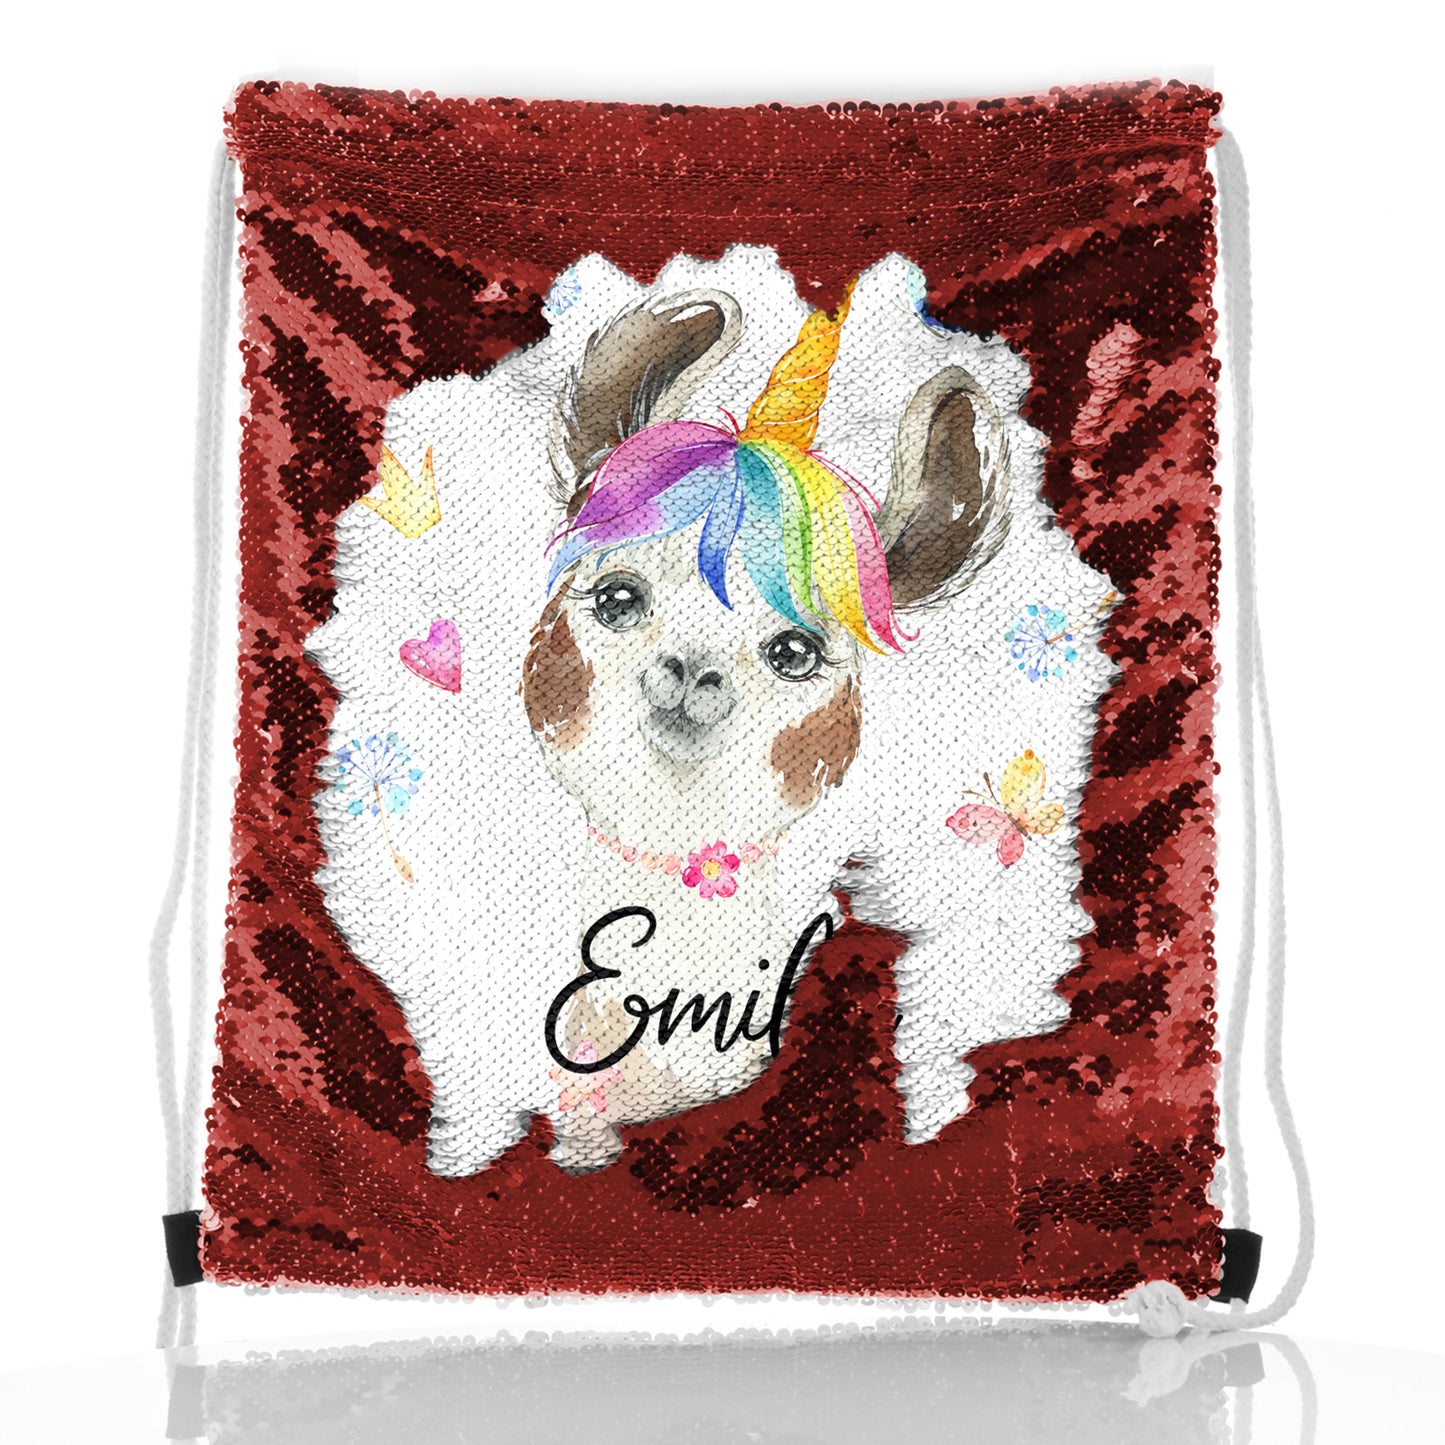 Personalised Sequin Drawstring Backpack with Alpaca Unicorn with Rainbow Hair Hearts Stars and Cute Text